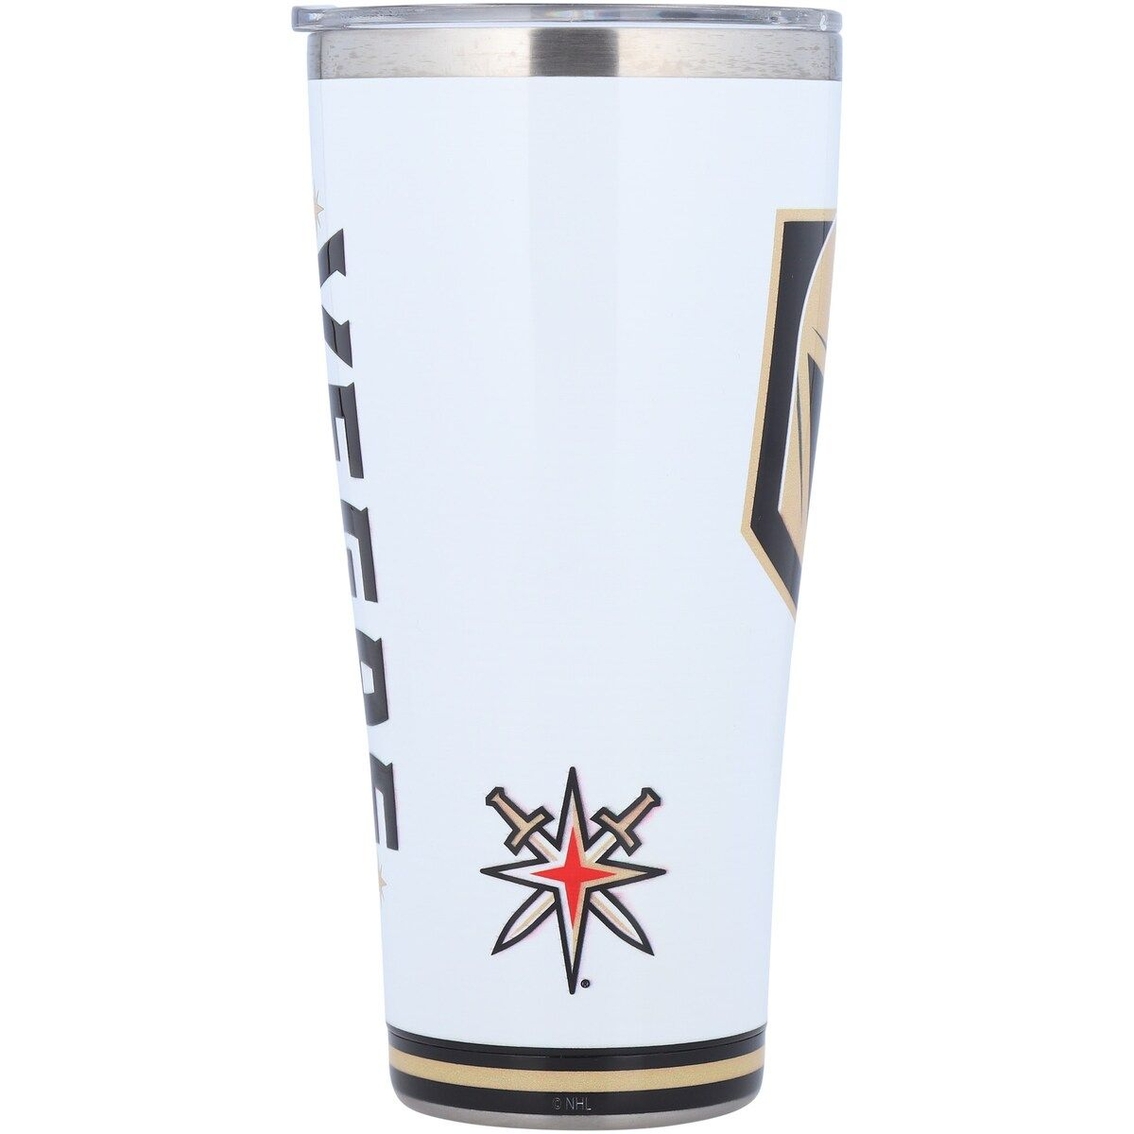 Tervis Vegas Golden Knights 30oz. Arctic Stainless Steel Tumbler - Image 4 of 4